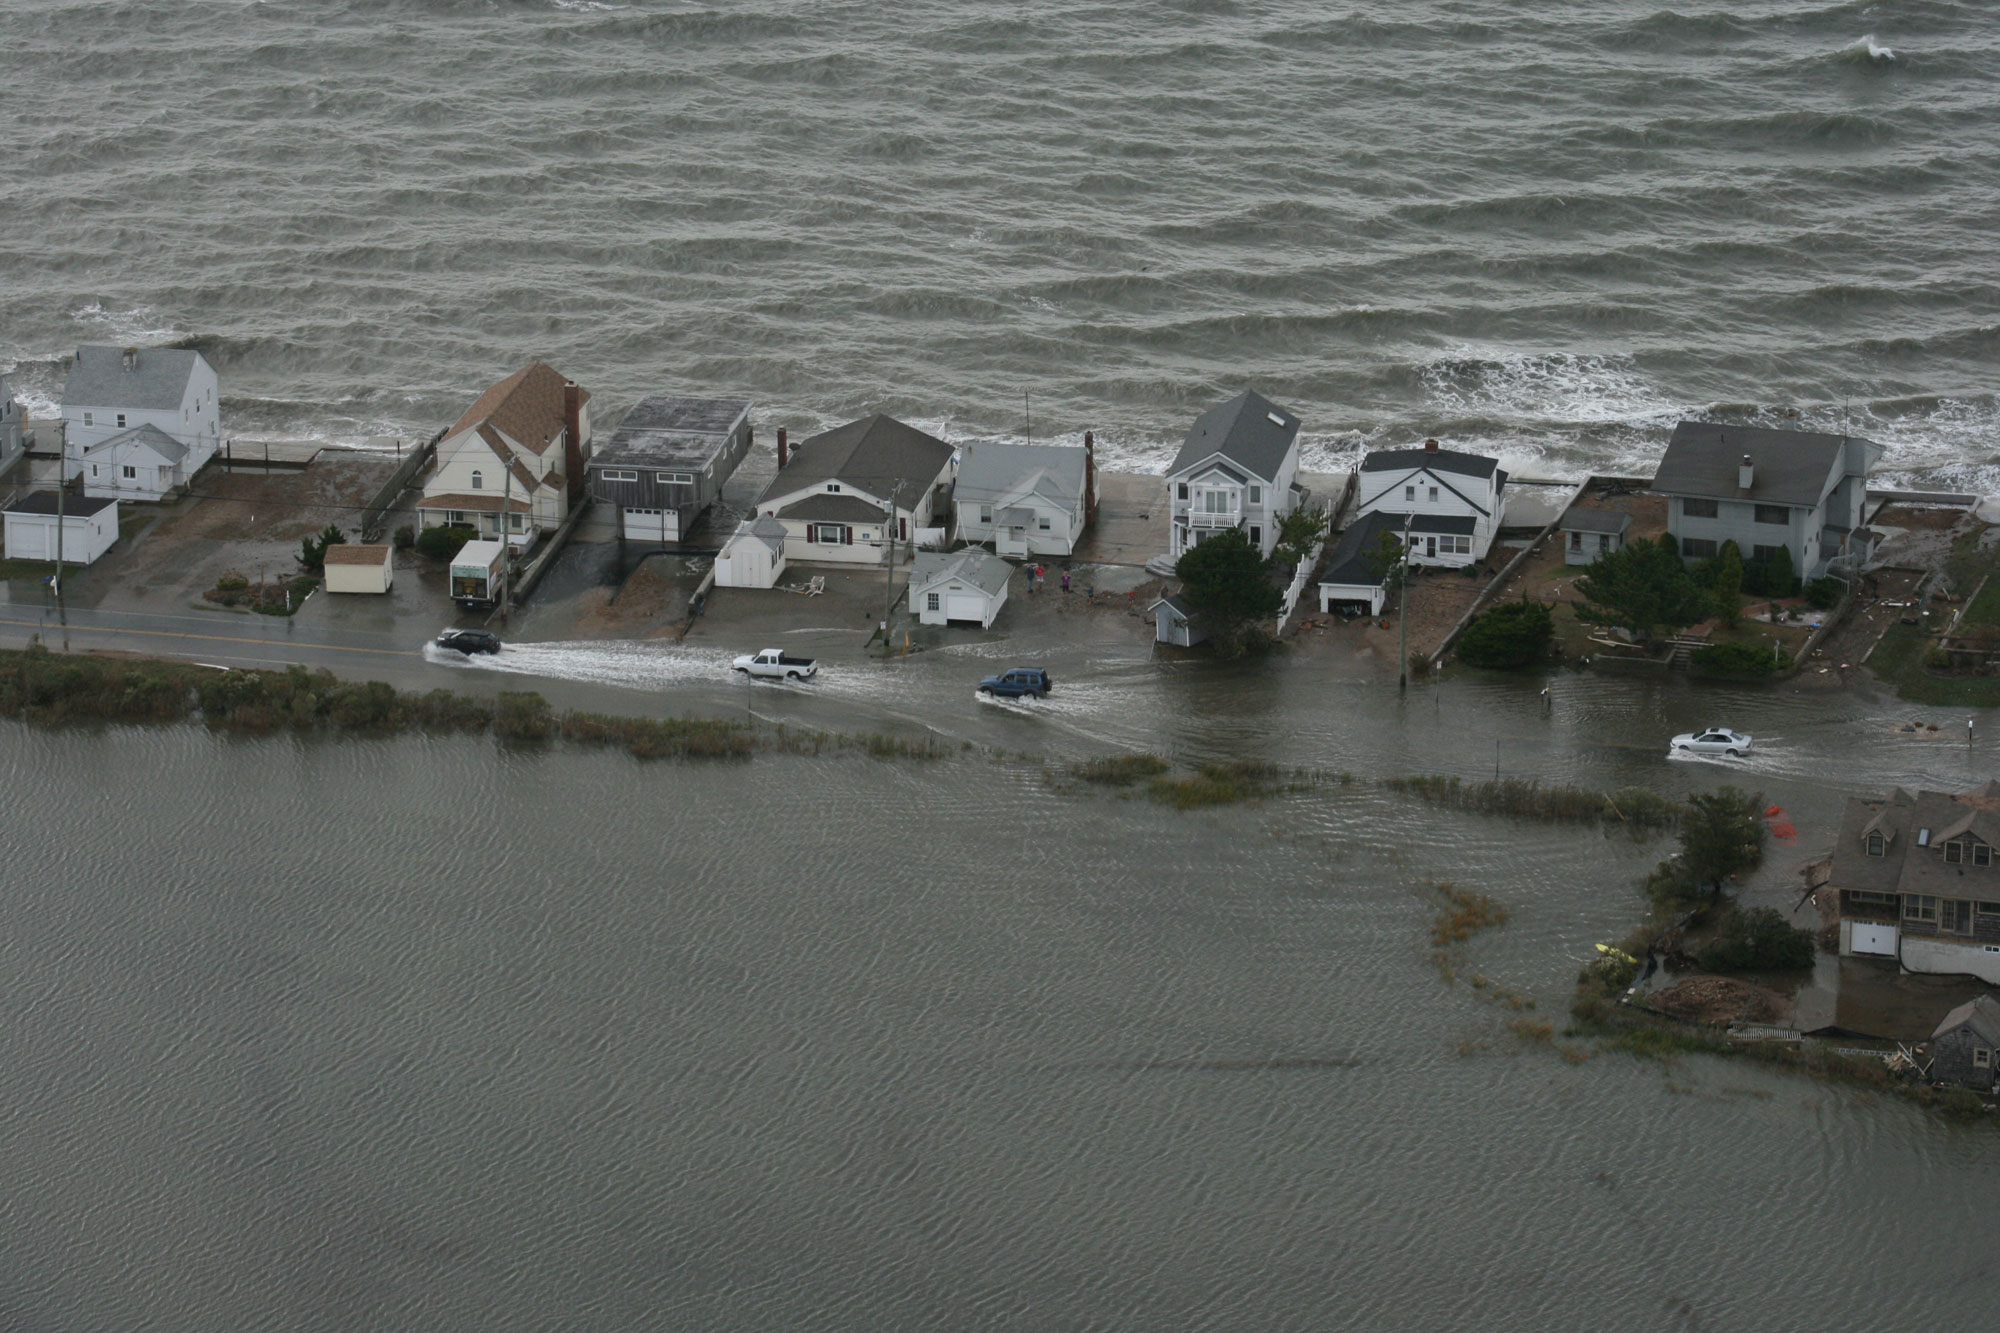 Aerial photograph of flooding in Connecticut following Hurricane Sandy in 2012. The photo shows a line of houses along a street. The landward area behind the houses is completely flooded, and the opposite sides of the houses face the ocean. Cars are driving on the street, which is also flooded.